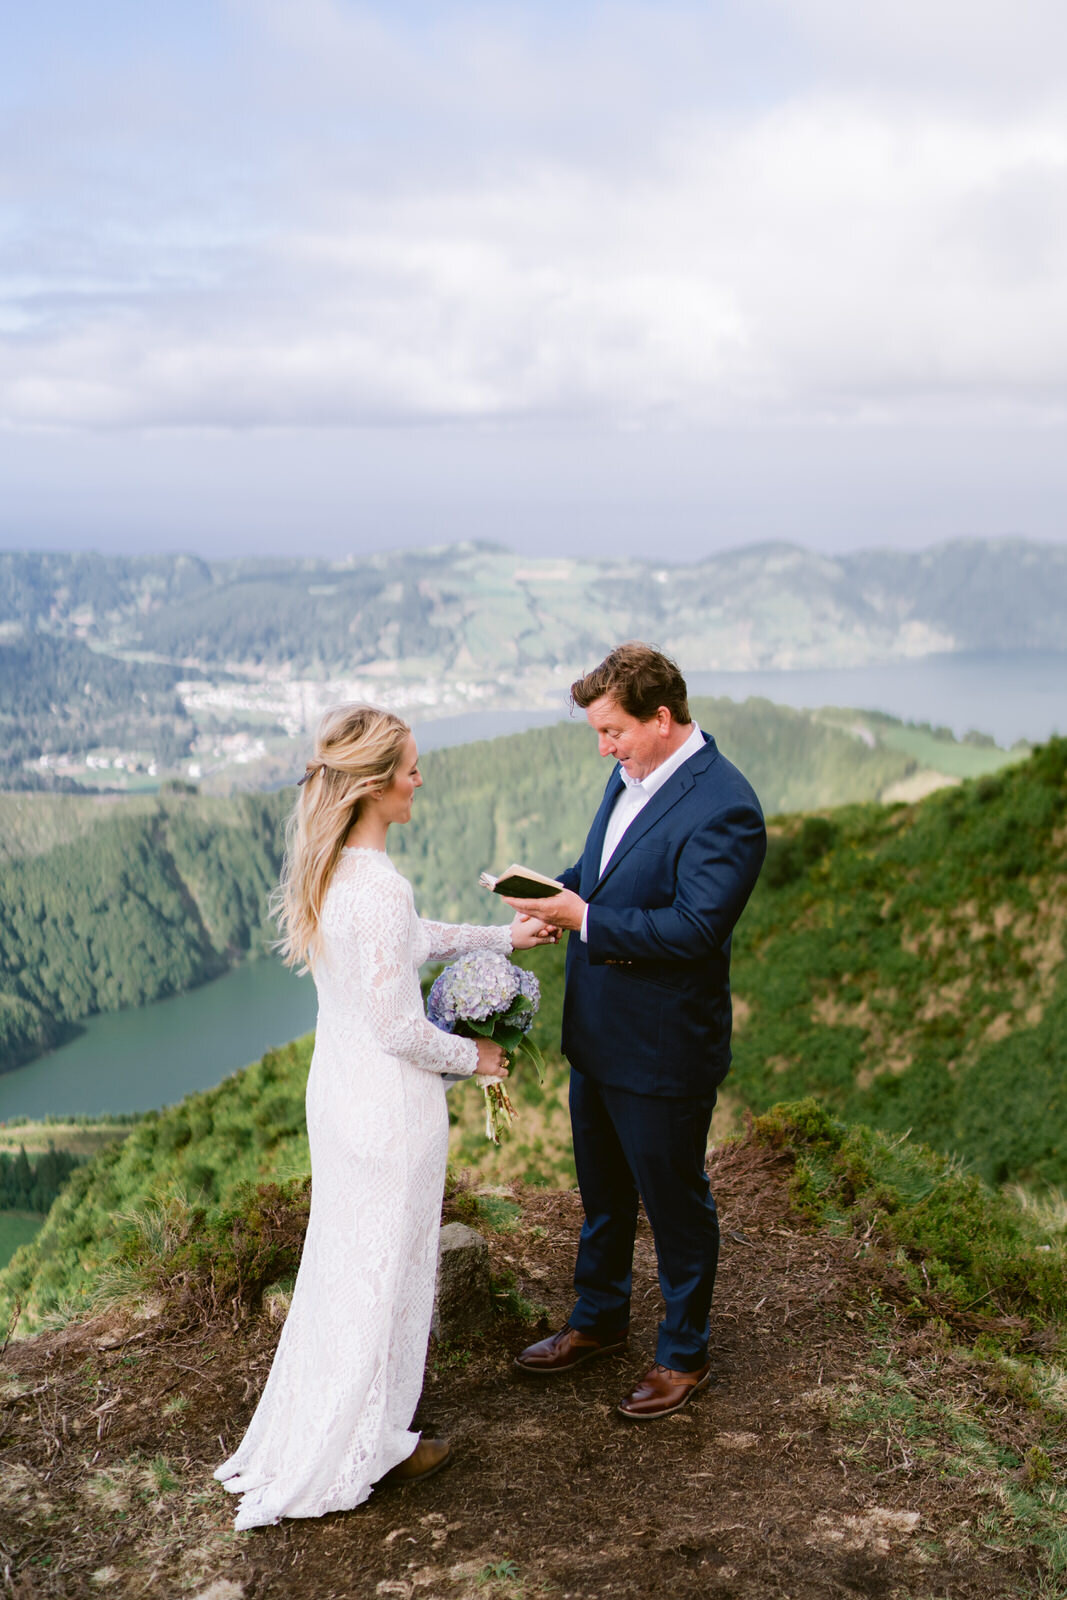 Elopement in the Azores. Cpuple getting married in Portugal. Elopement photography in Europe. Epic locations to elope in the world. Sao Miquel island Azores wedding (31).jpg